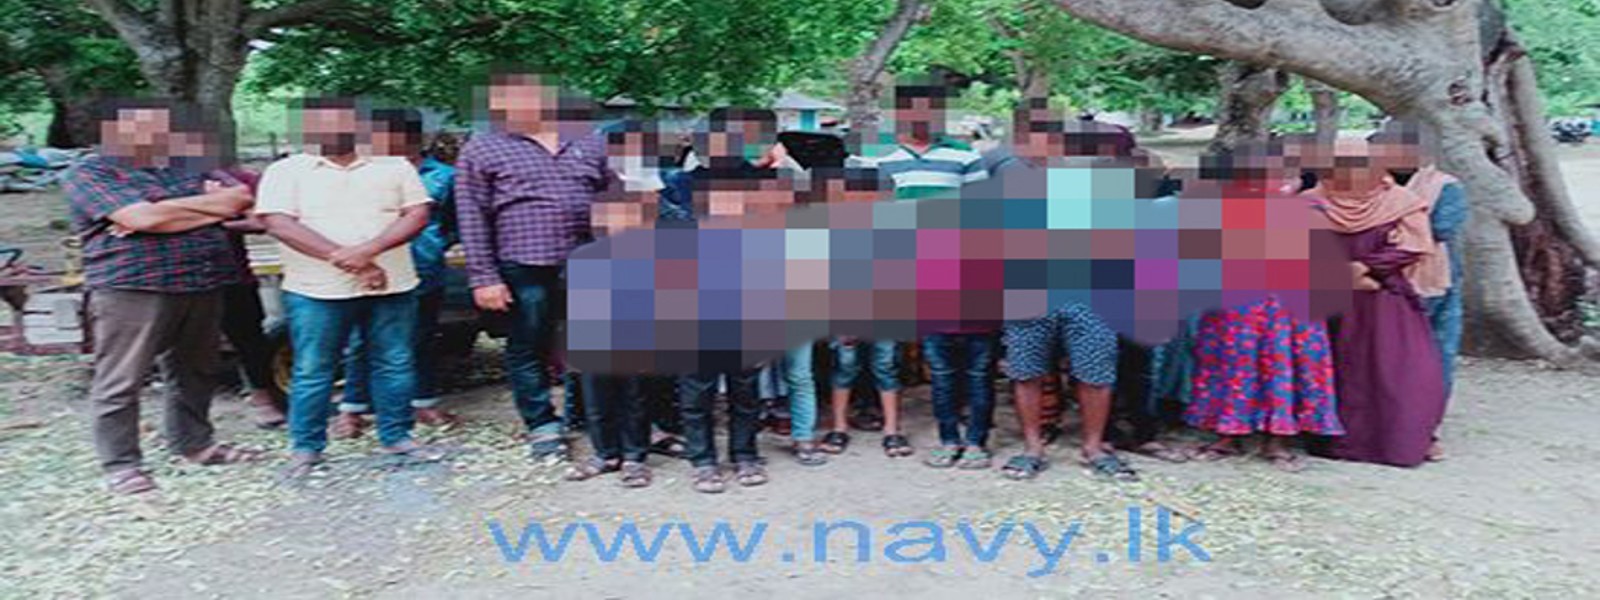 53 people arrested for illegal migration attempt